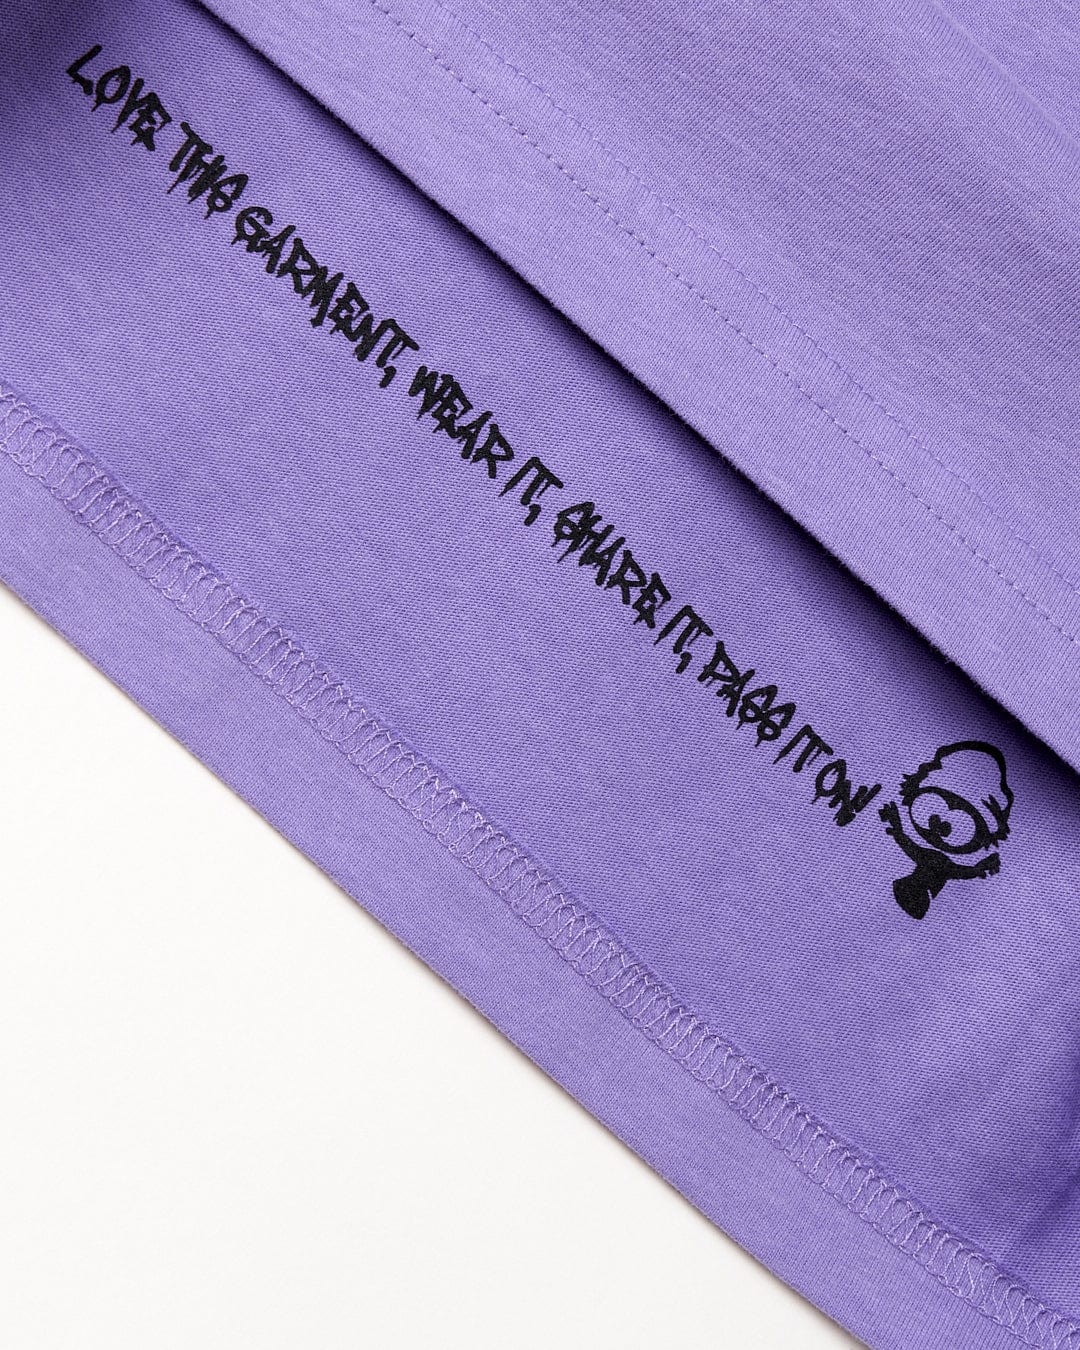 A purple Cotton fabric with black text featuring Saltrock surfing graphics.